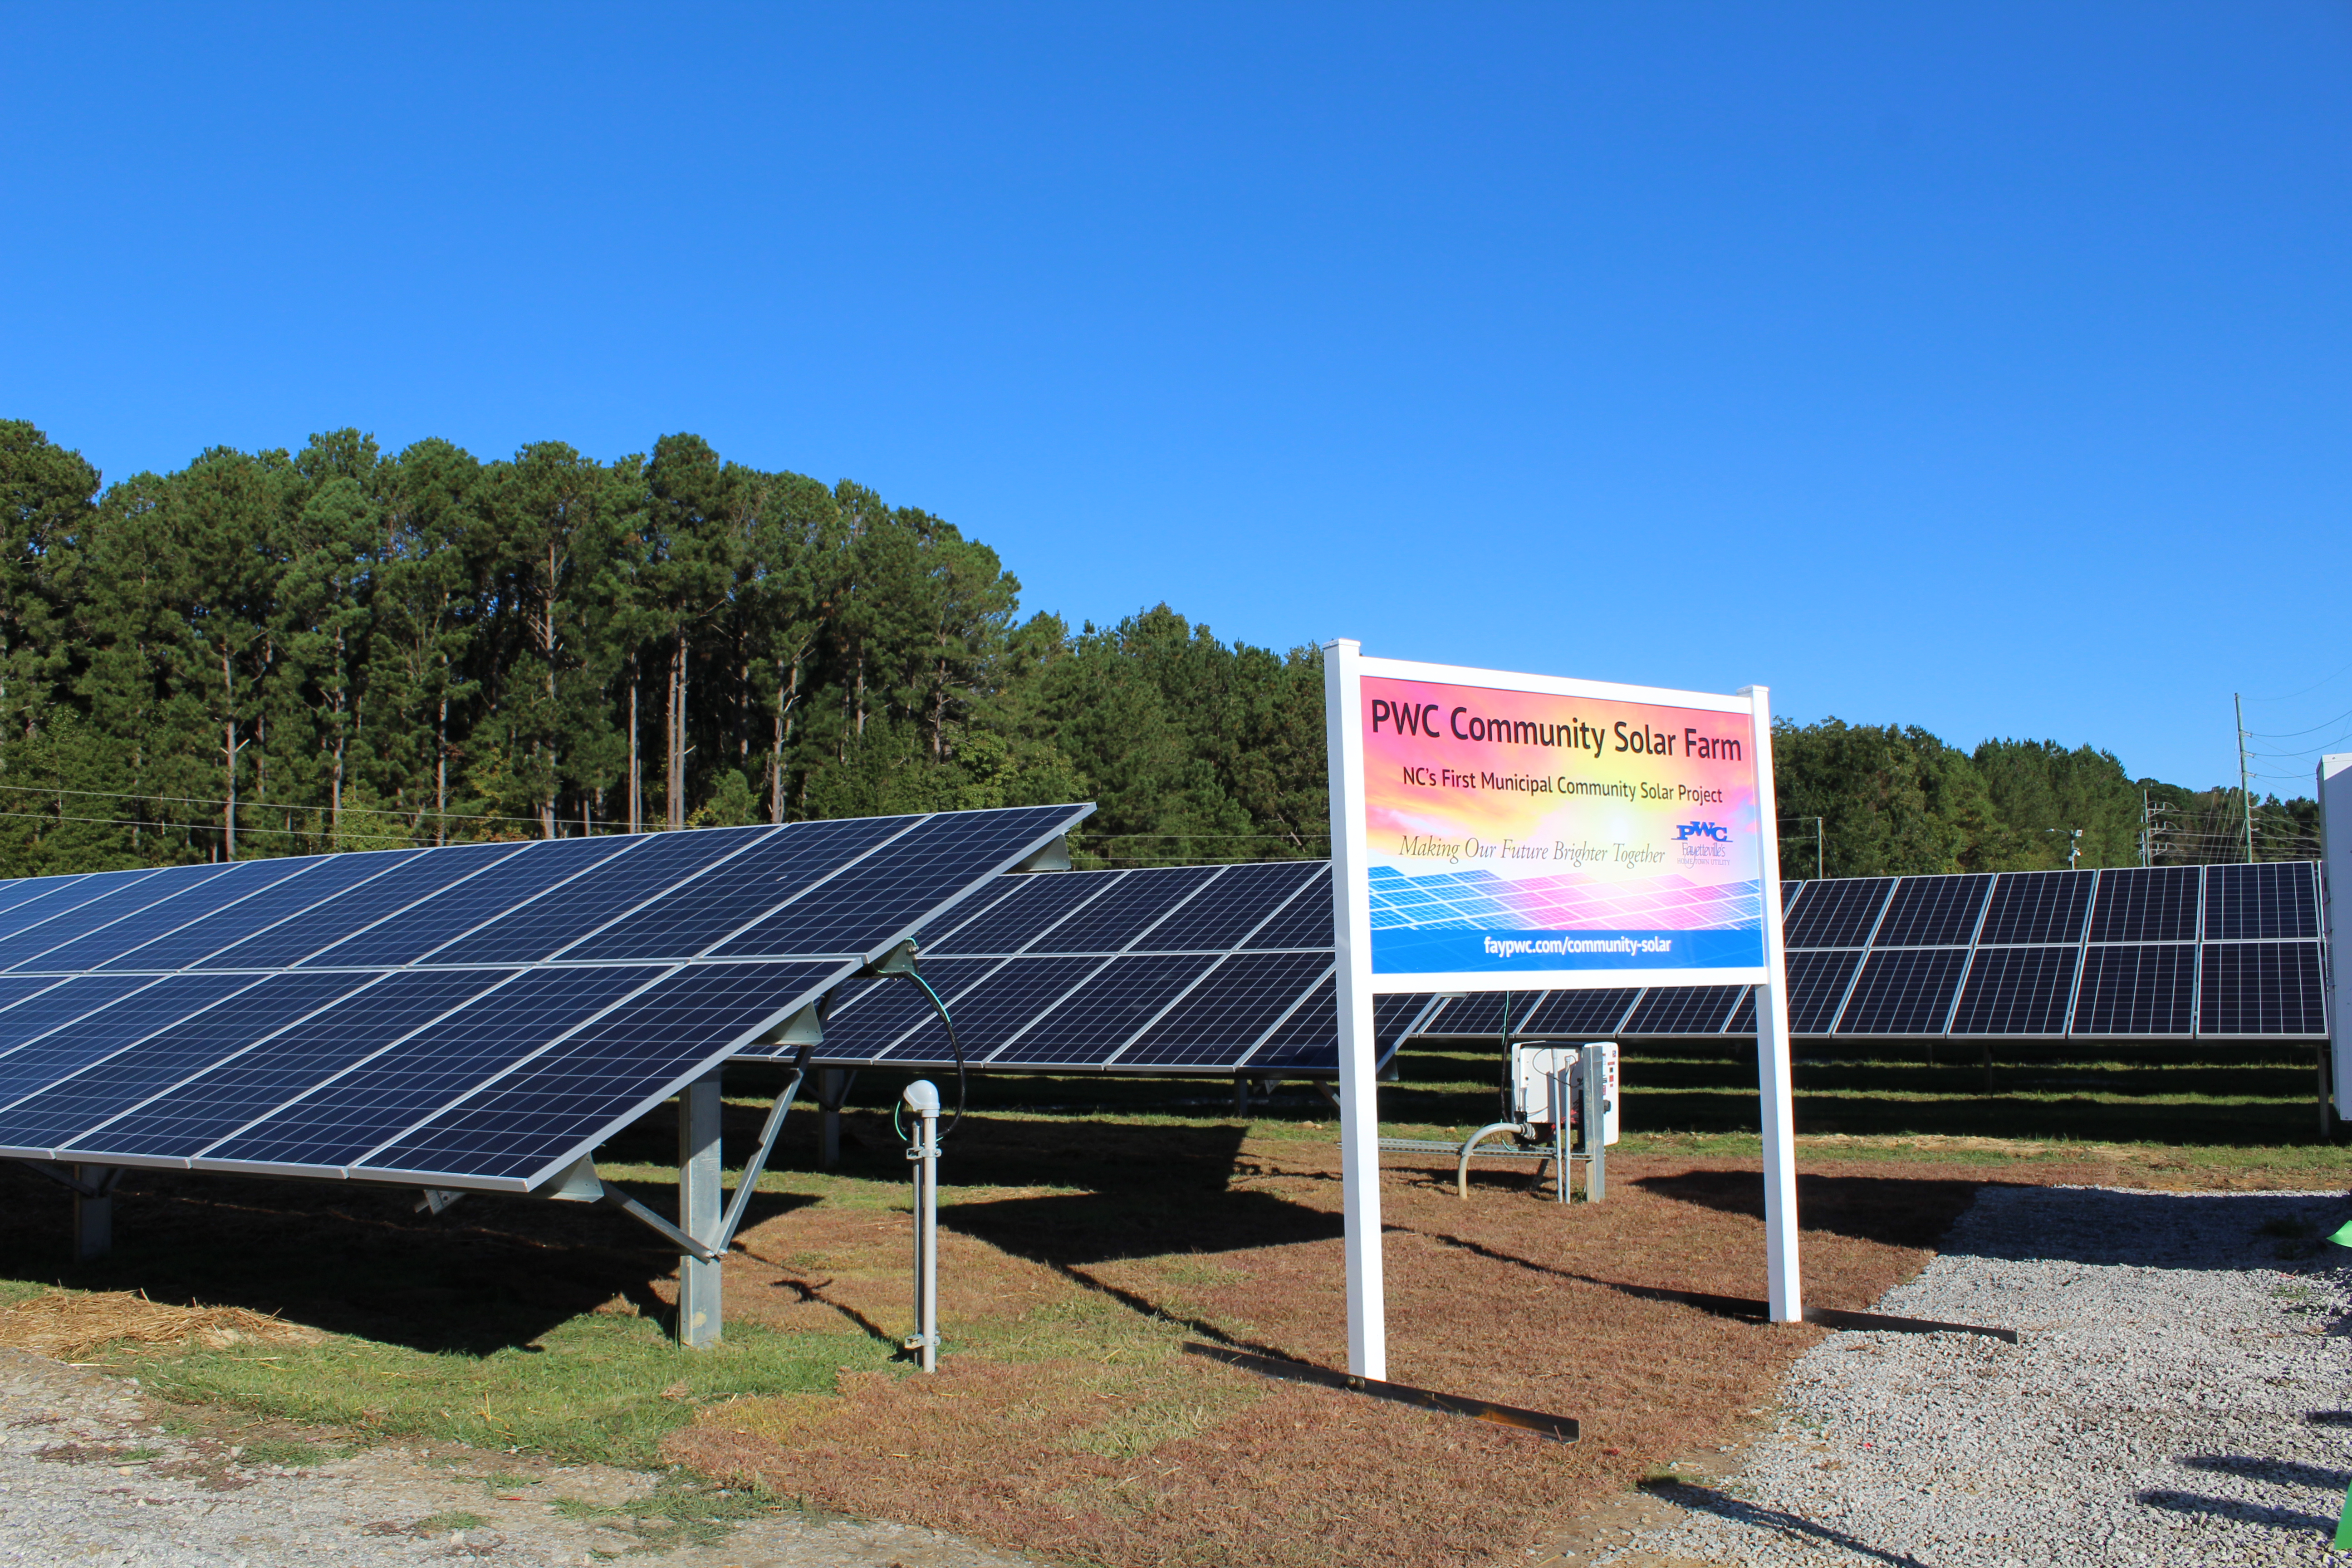 fayetteville-public-works-commission-s-community-solar-farm-the-first